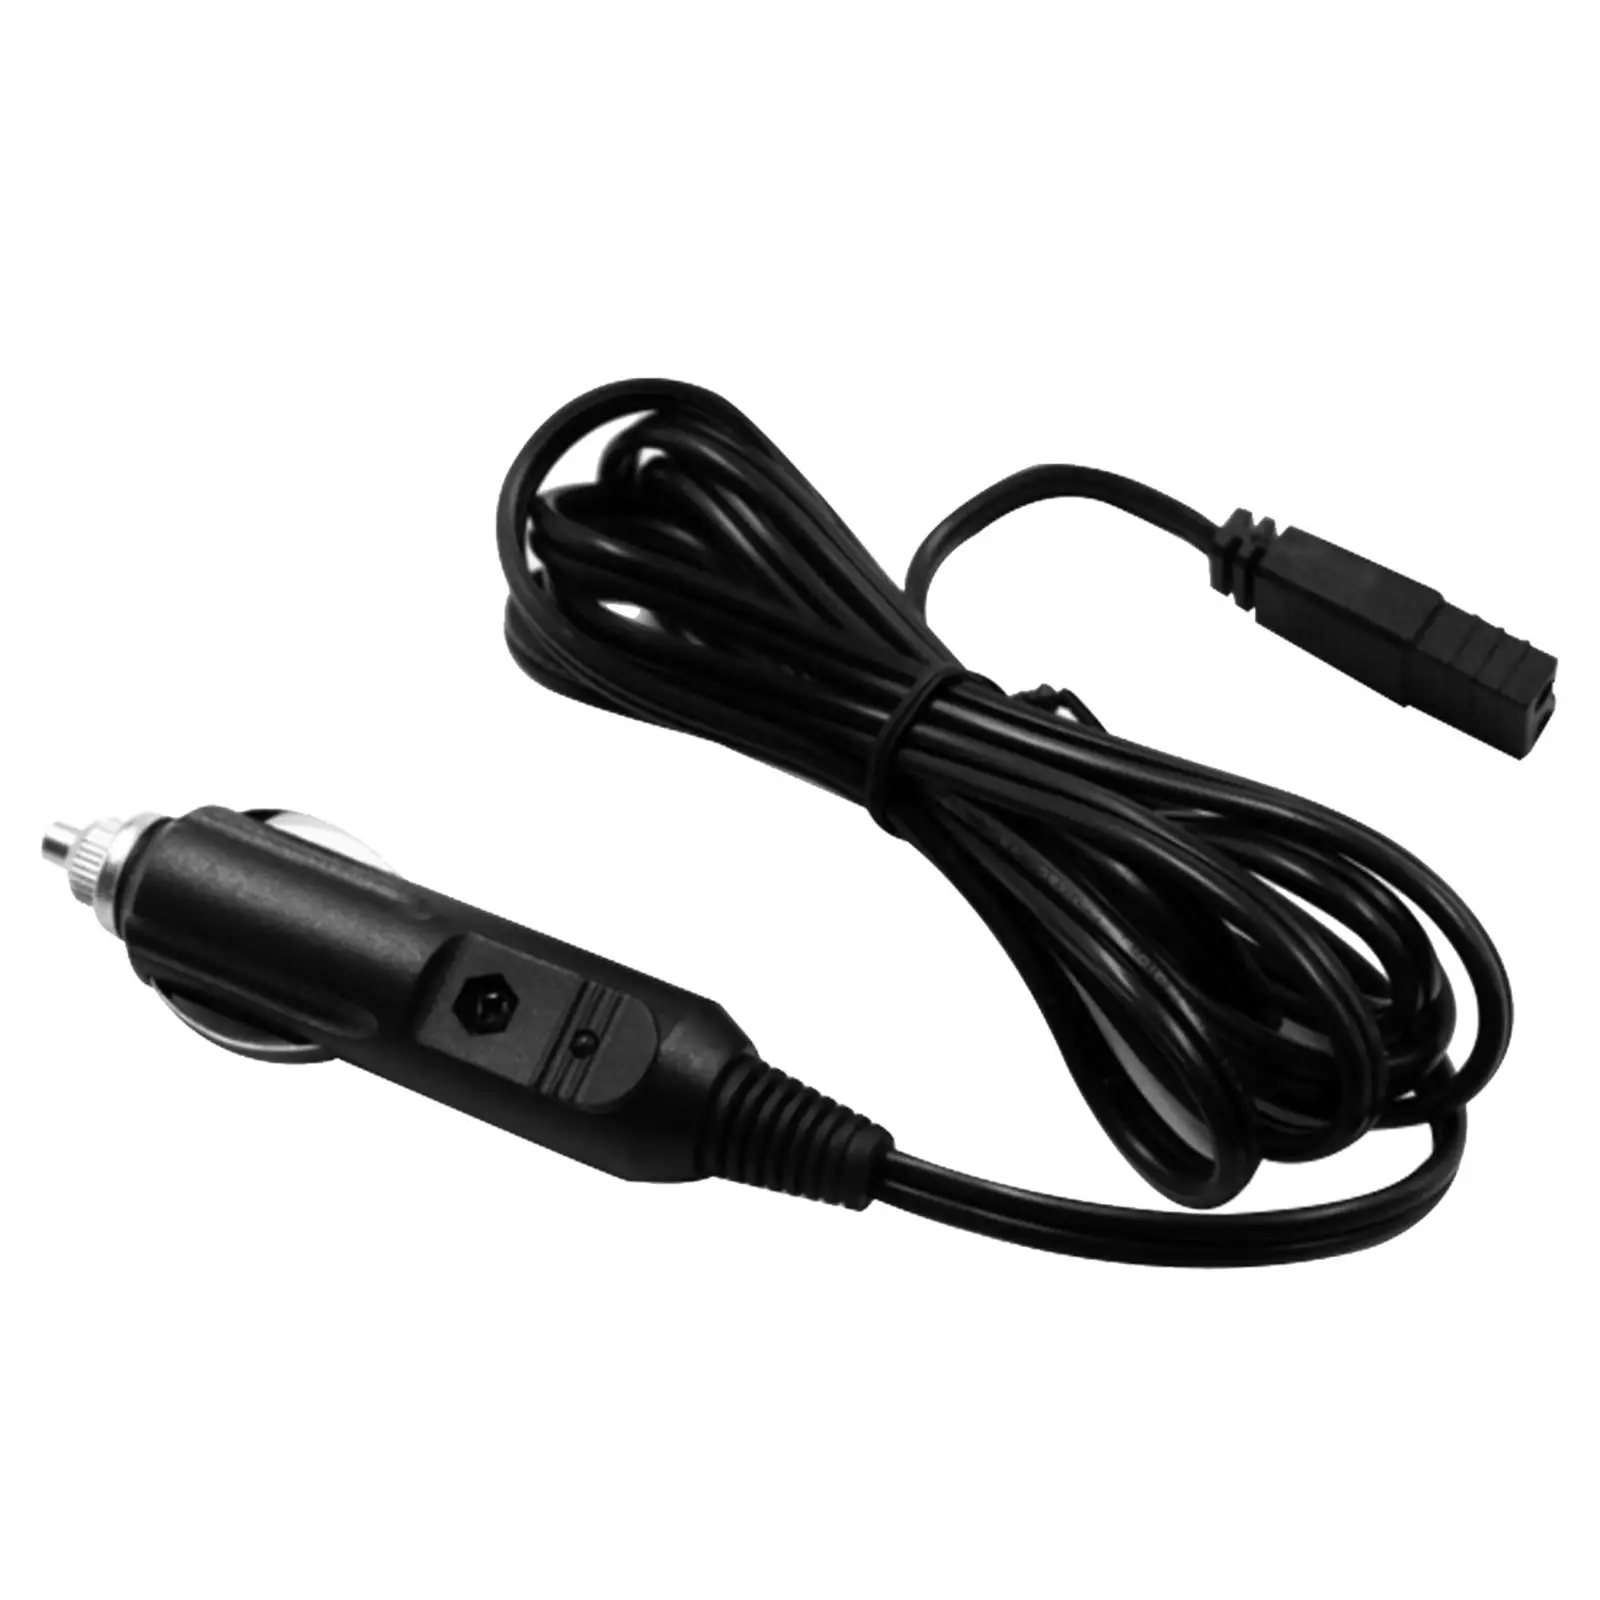 63inch Power Cable Cord DC 12V 24V for Car Refrigerator Cooler Simple Installation